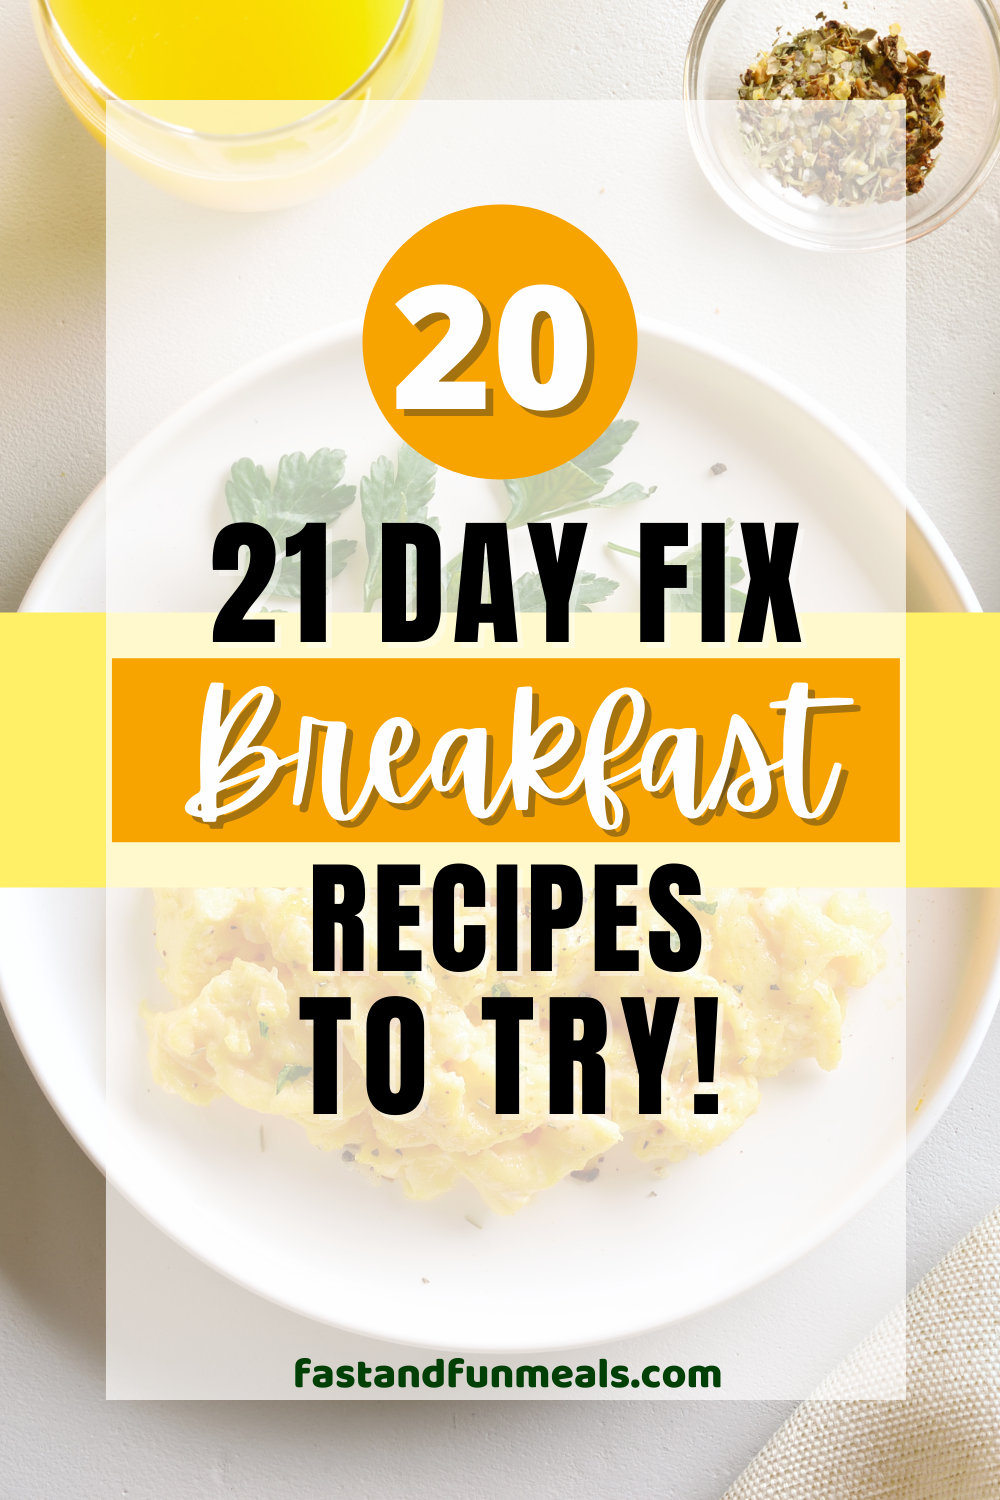 Pin showing 20 21 Day Fix Breakfast Recipes to Try!